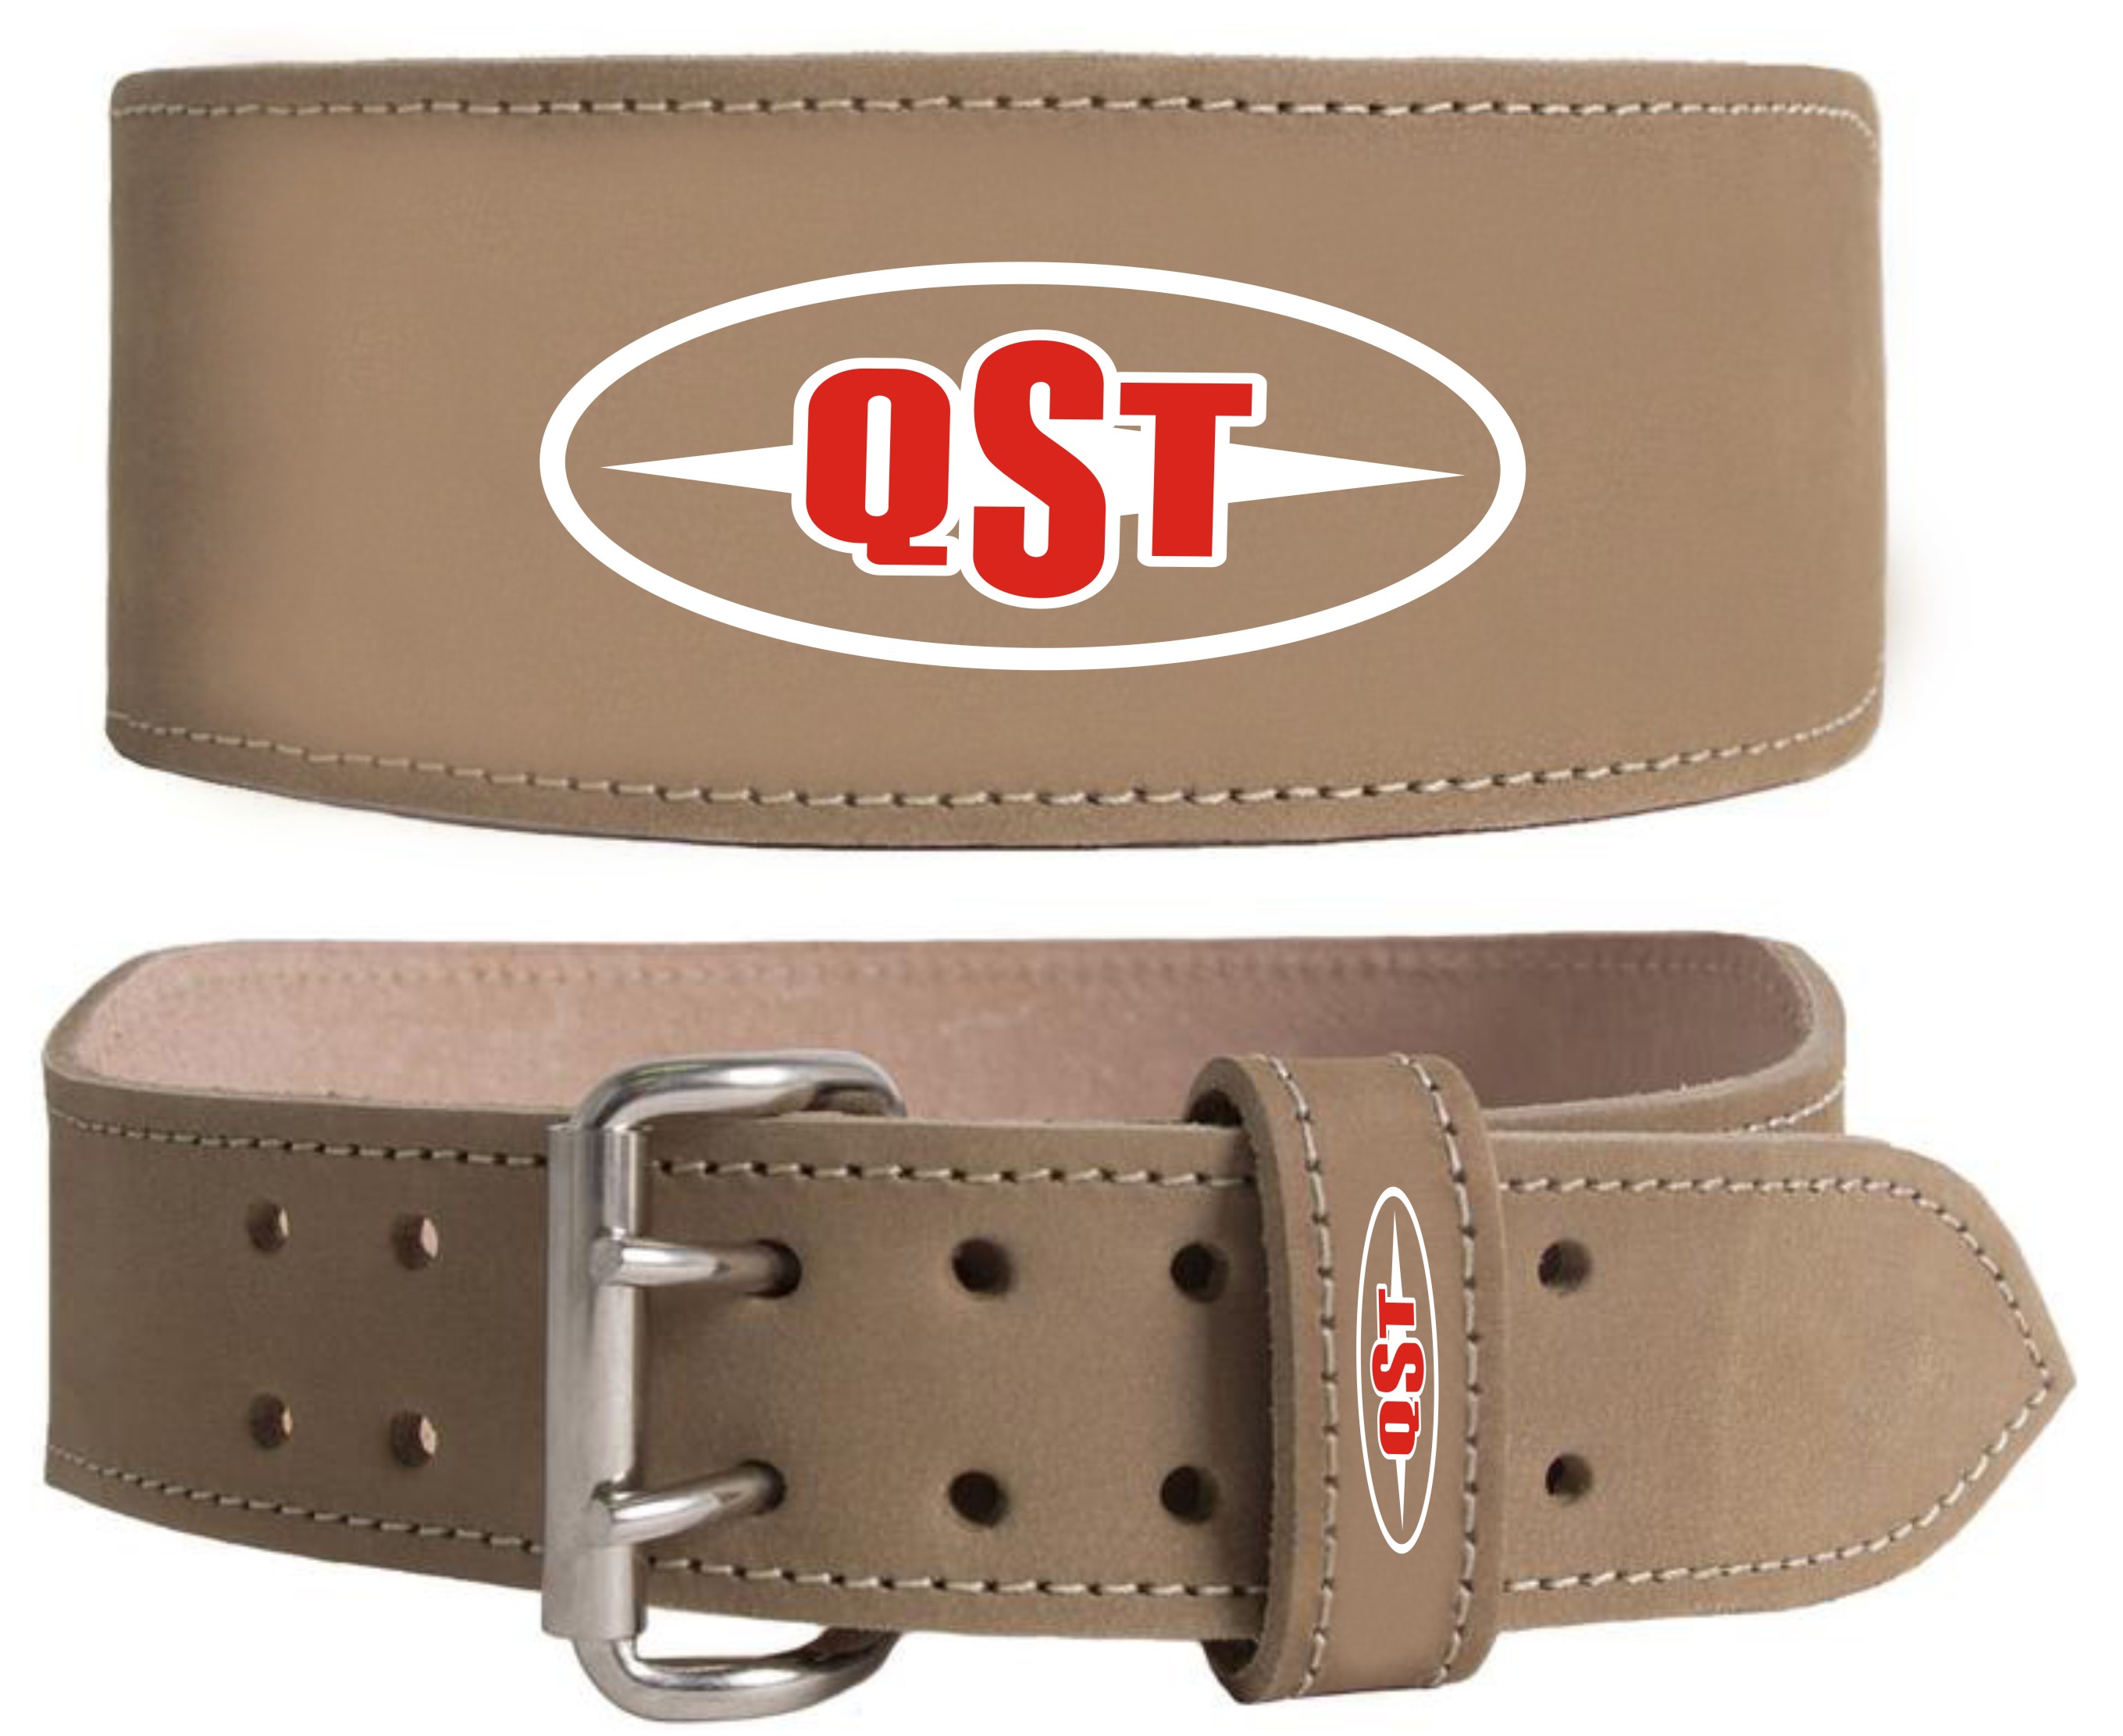 Leather Weightlifting Belt - ACS-1205